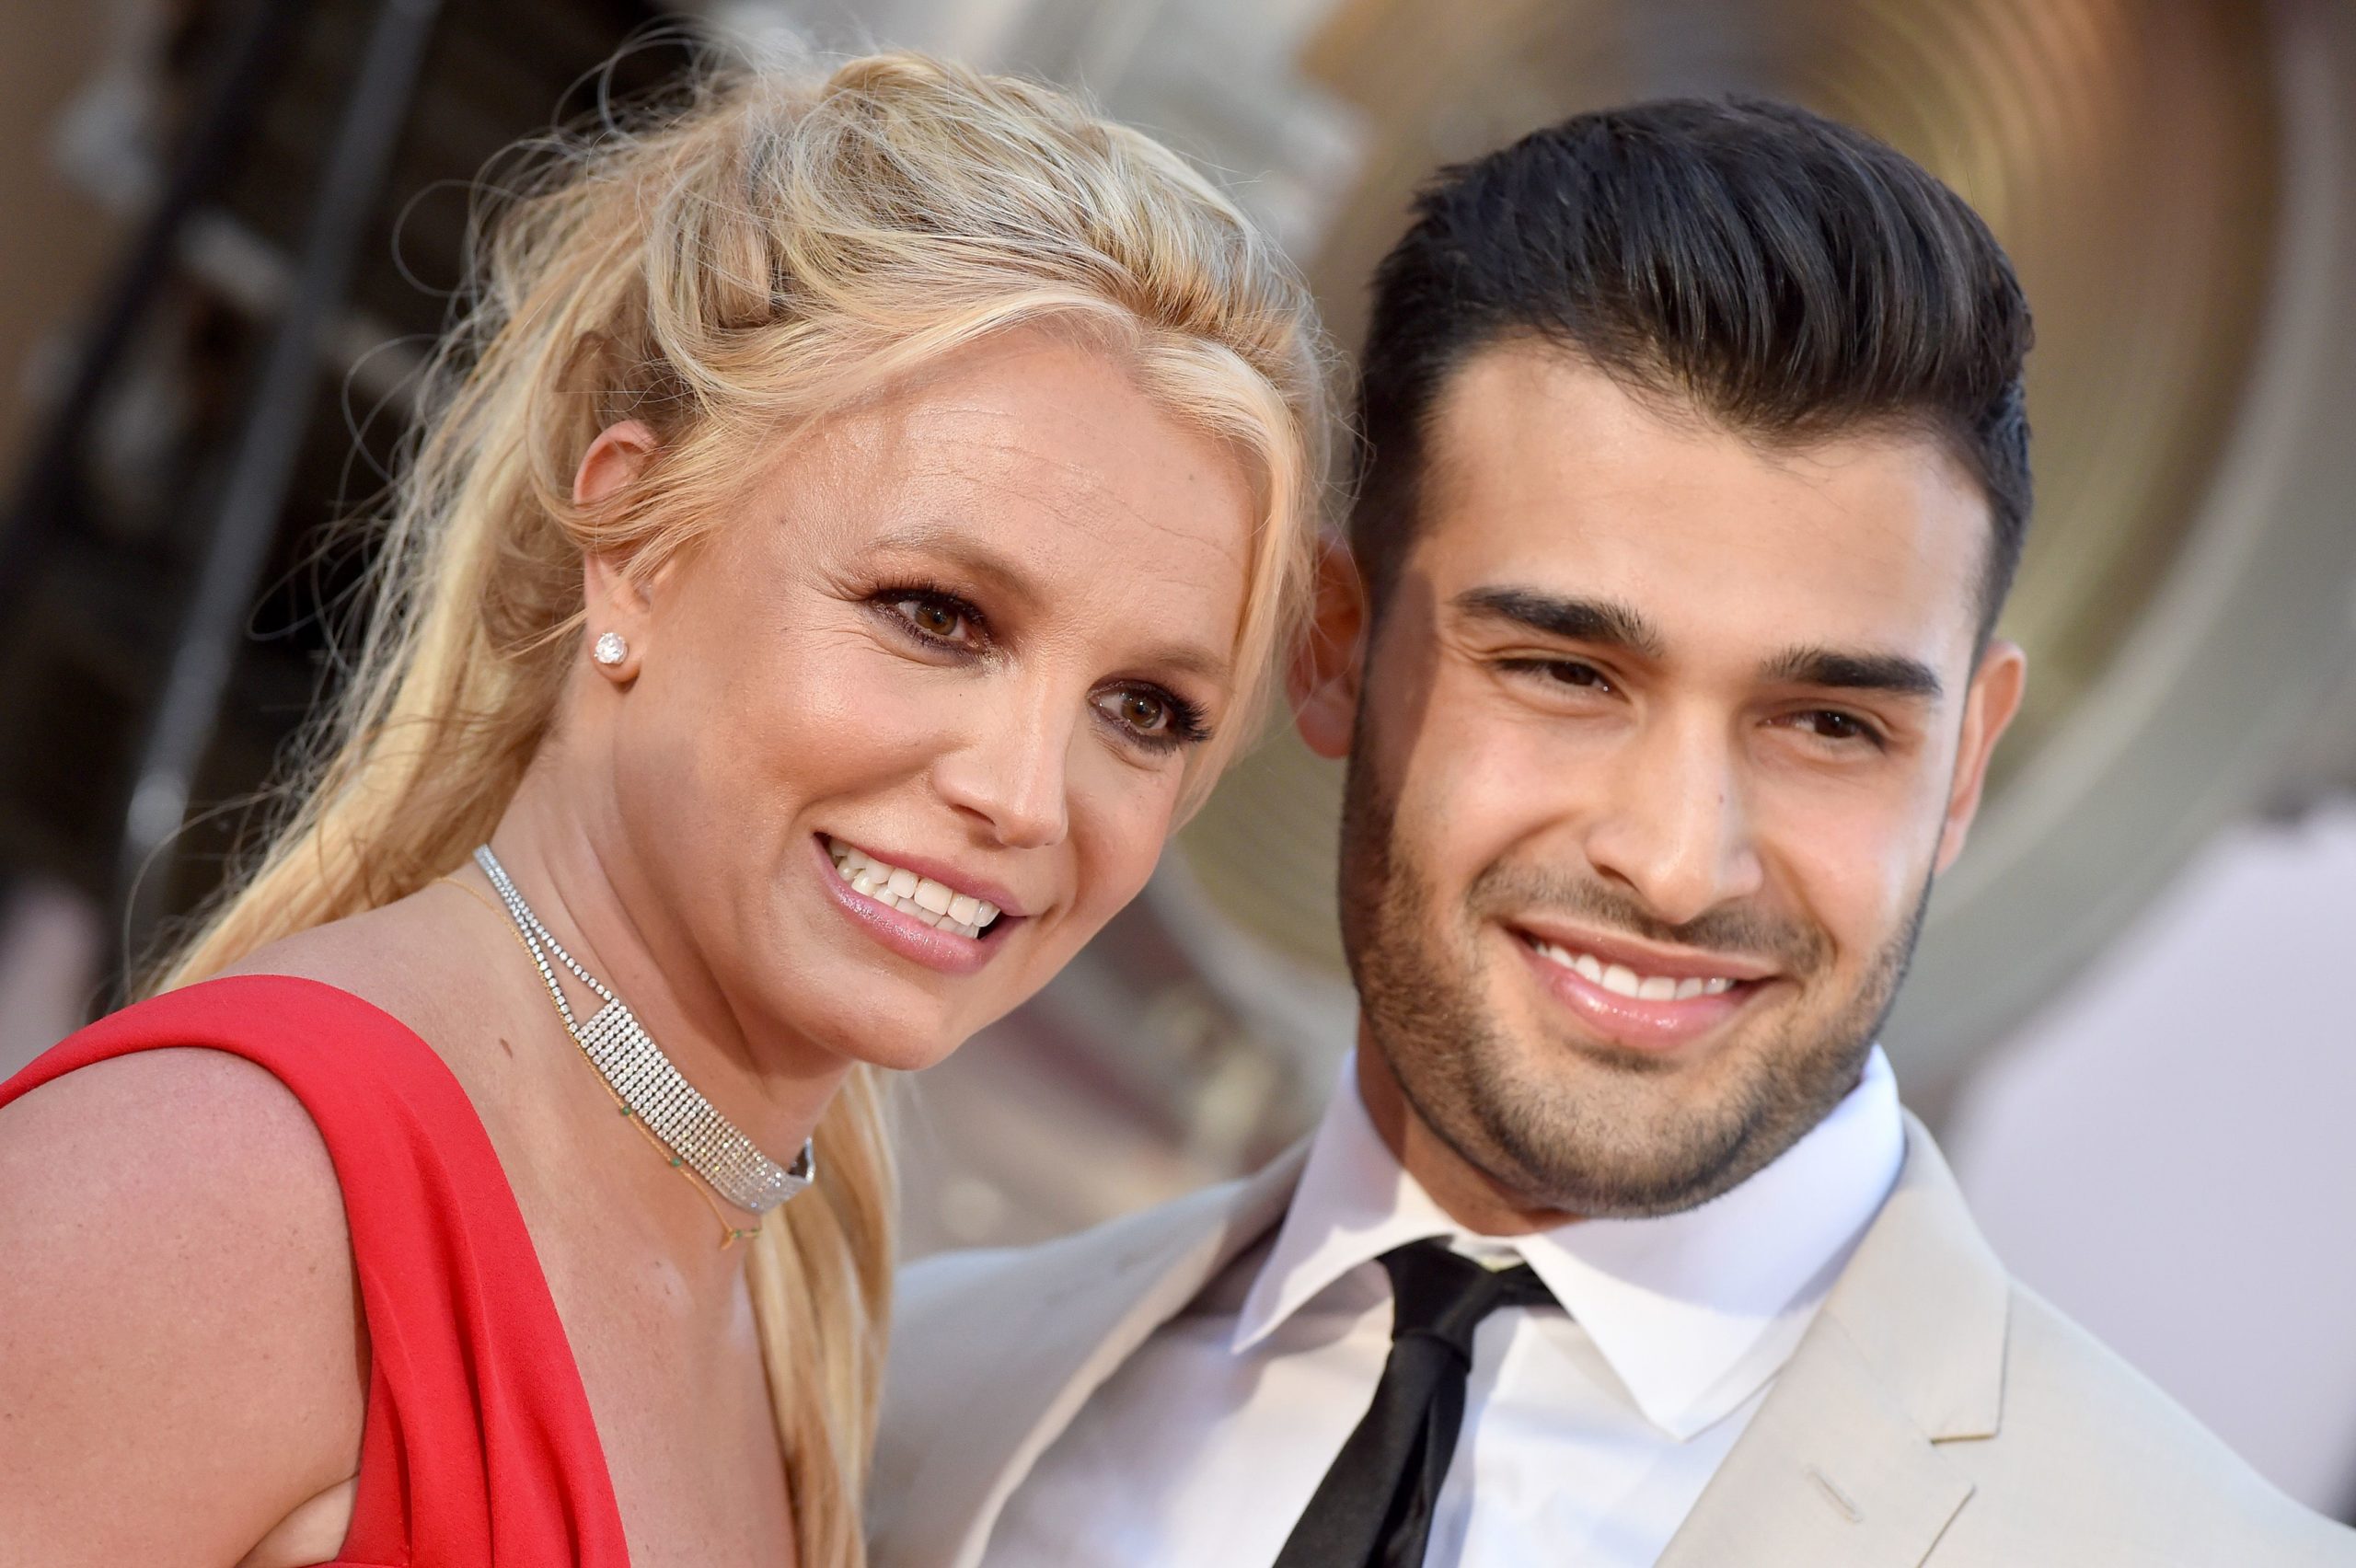 Britney Spears Sam Ashagri Awkward first meeting With Cute nickname and Prenup please!